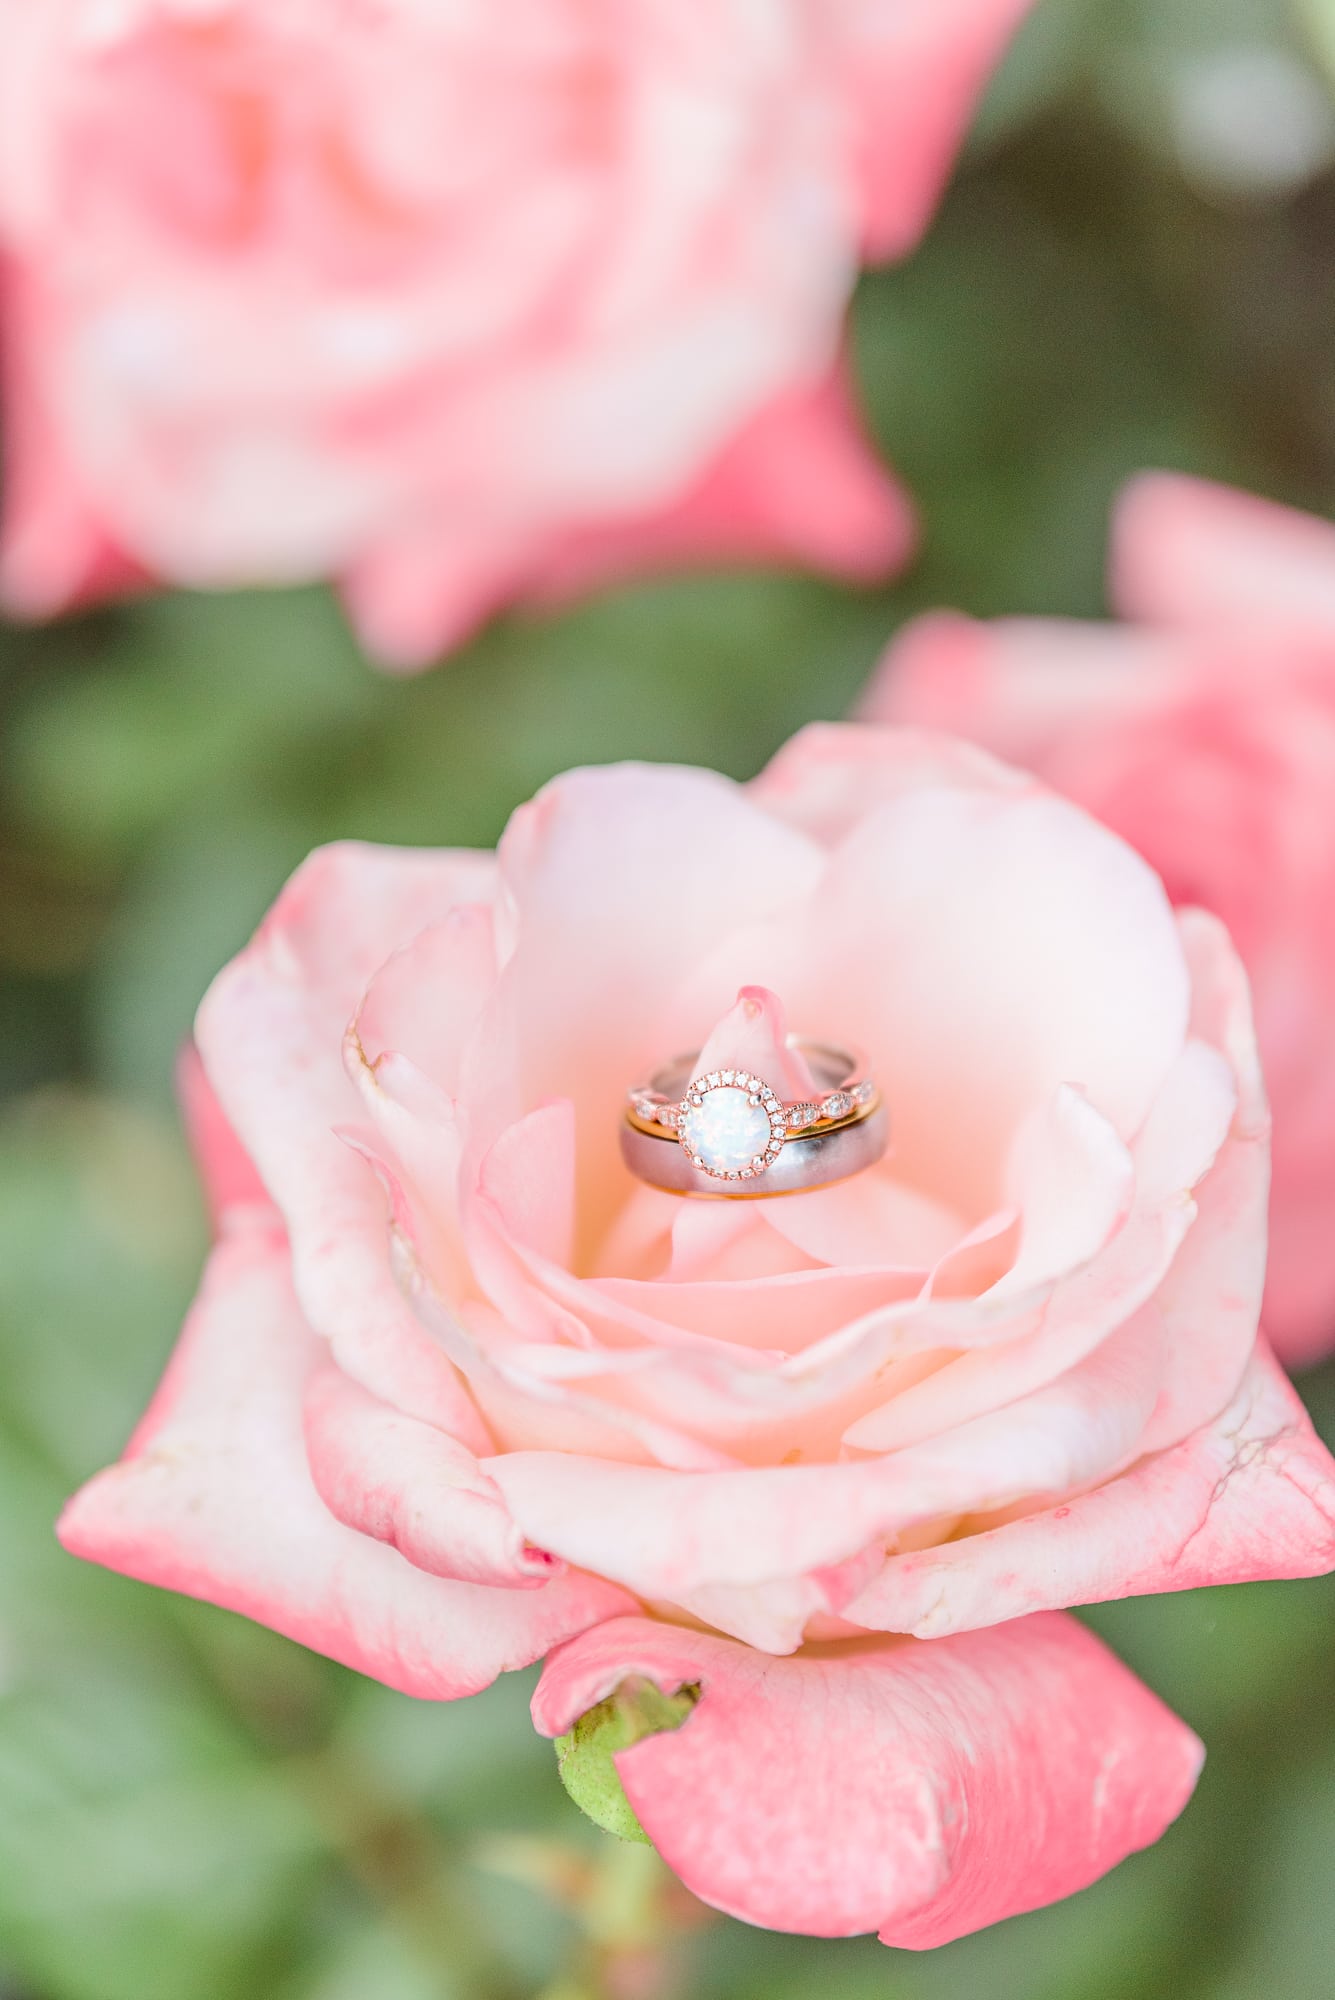 The perfect spring engagement photos with roses and engagement rings.